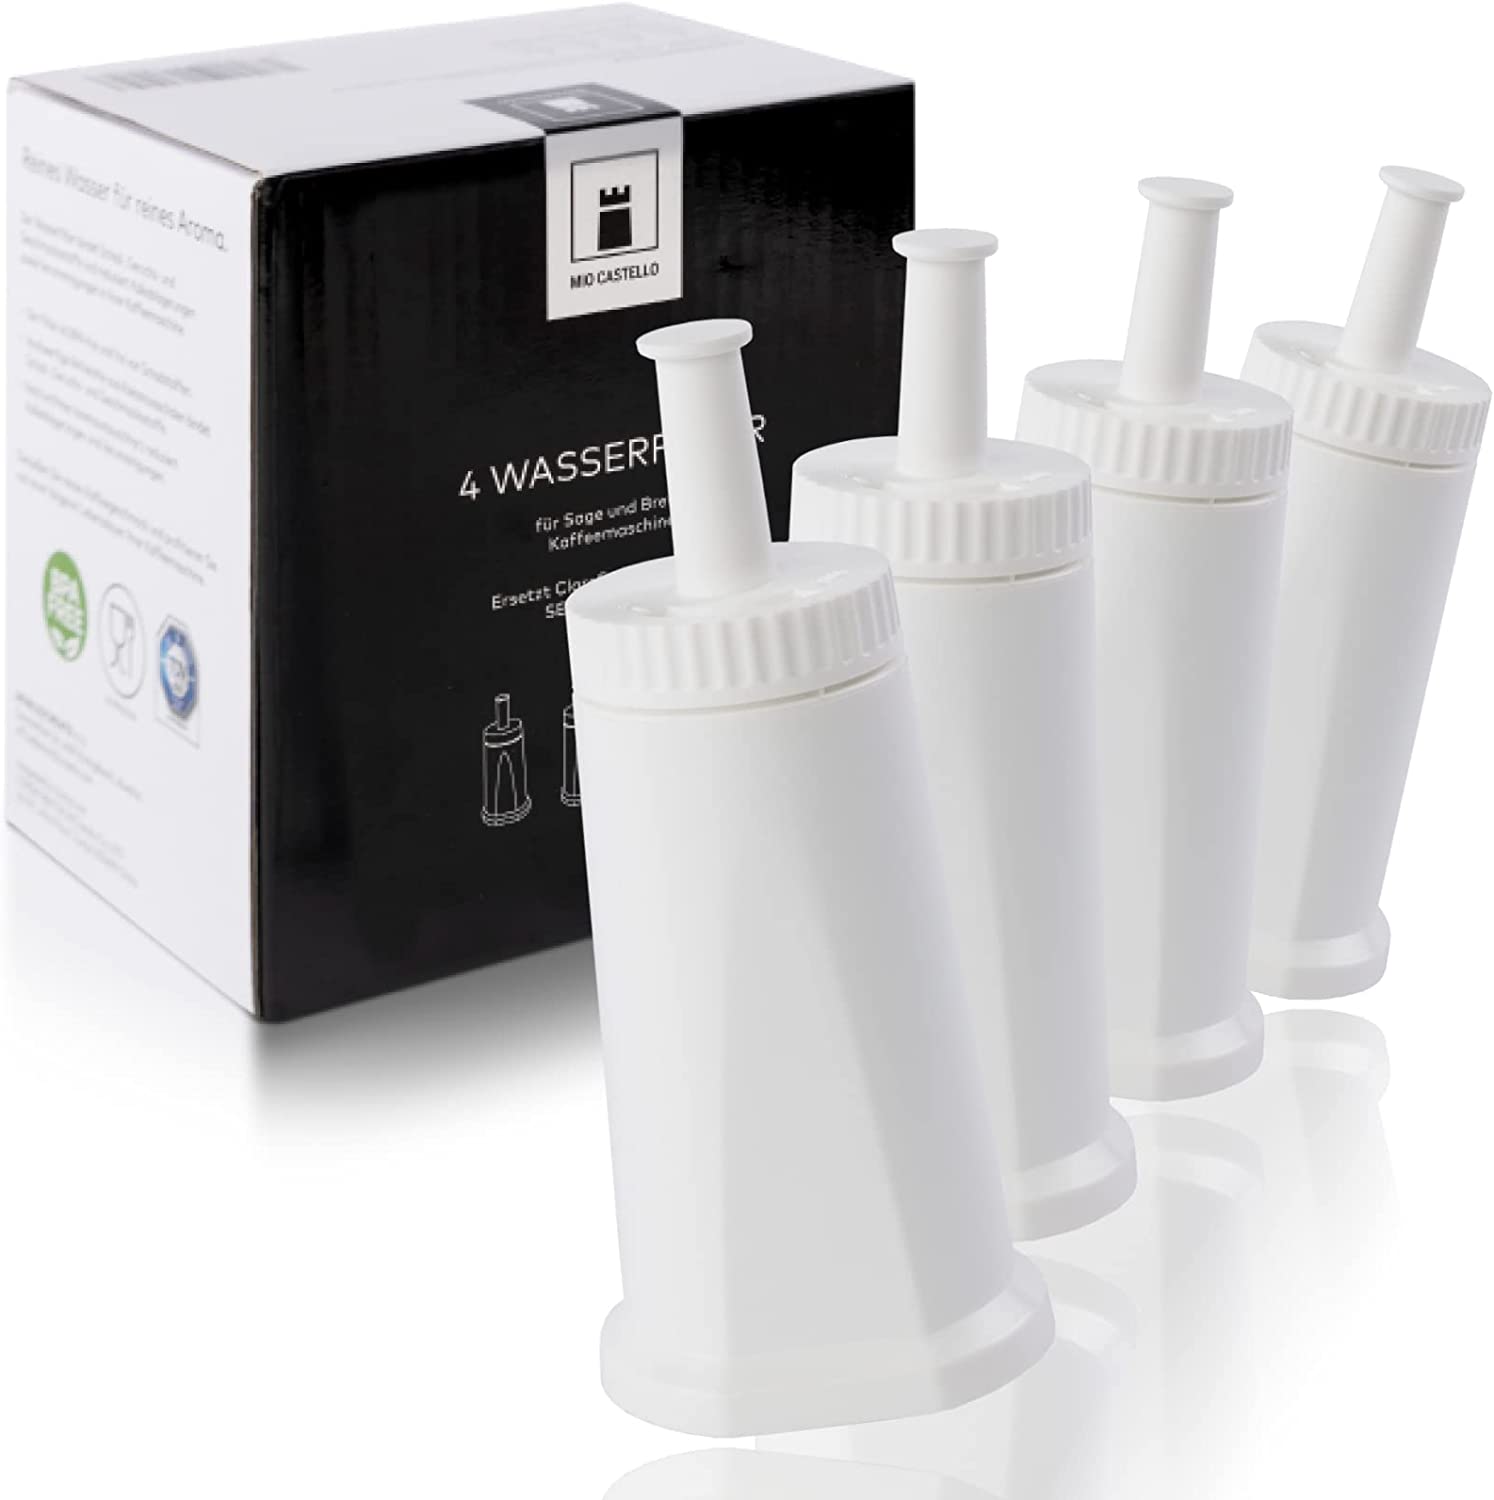 MIO CASTELLO 4 X Water Filters for Sage/Breville (TÜV Süd Tested) - Replaces Claro Swiss Ses008 BES008 for SES878 SES980 SES880 SES810 BES980 BES878.